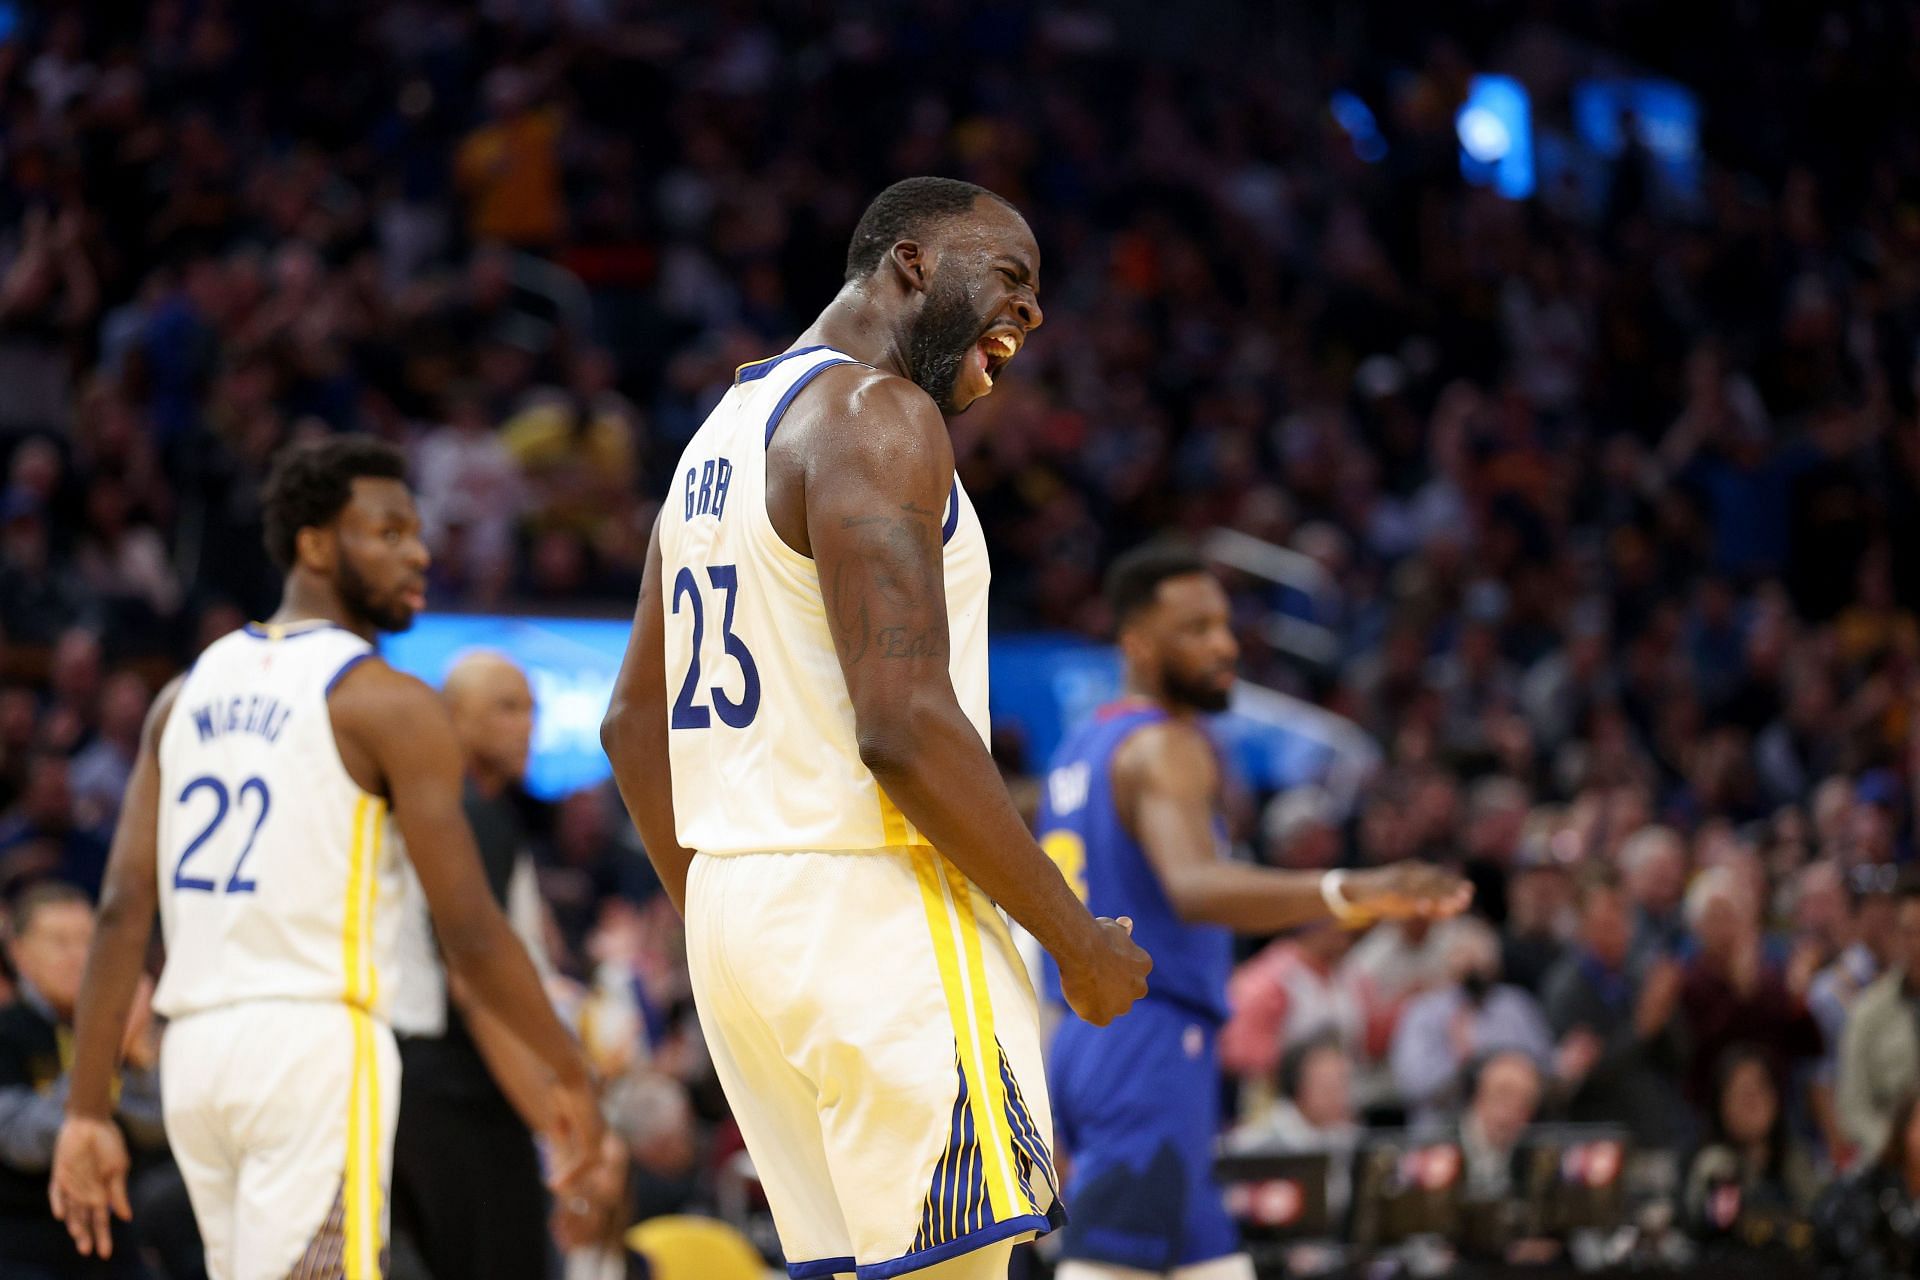 Draymond Green #23 of the Golden State Warriors reacts after he drew an offensive foul on Aaron Gordon #50 of the Denver Nuggets in the first half during Game Two of the Western Conference First Round NBA Playoffs at Chase Center on April 18, 2022 